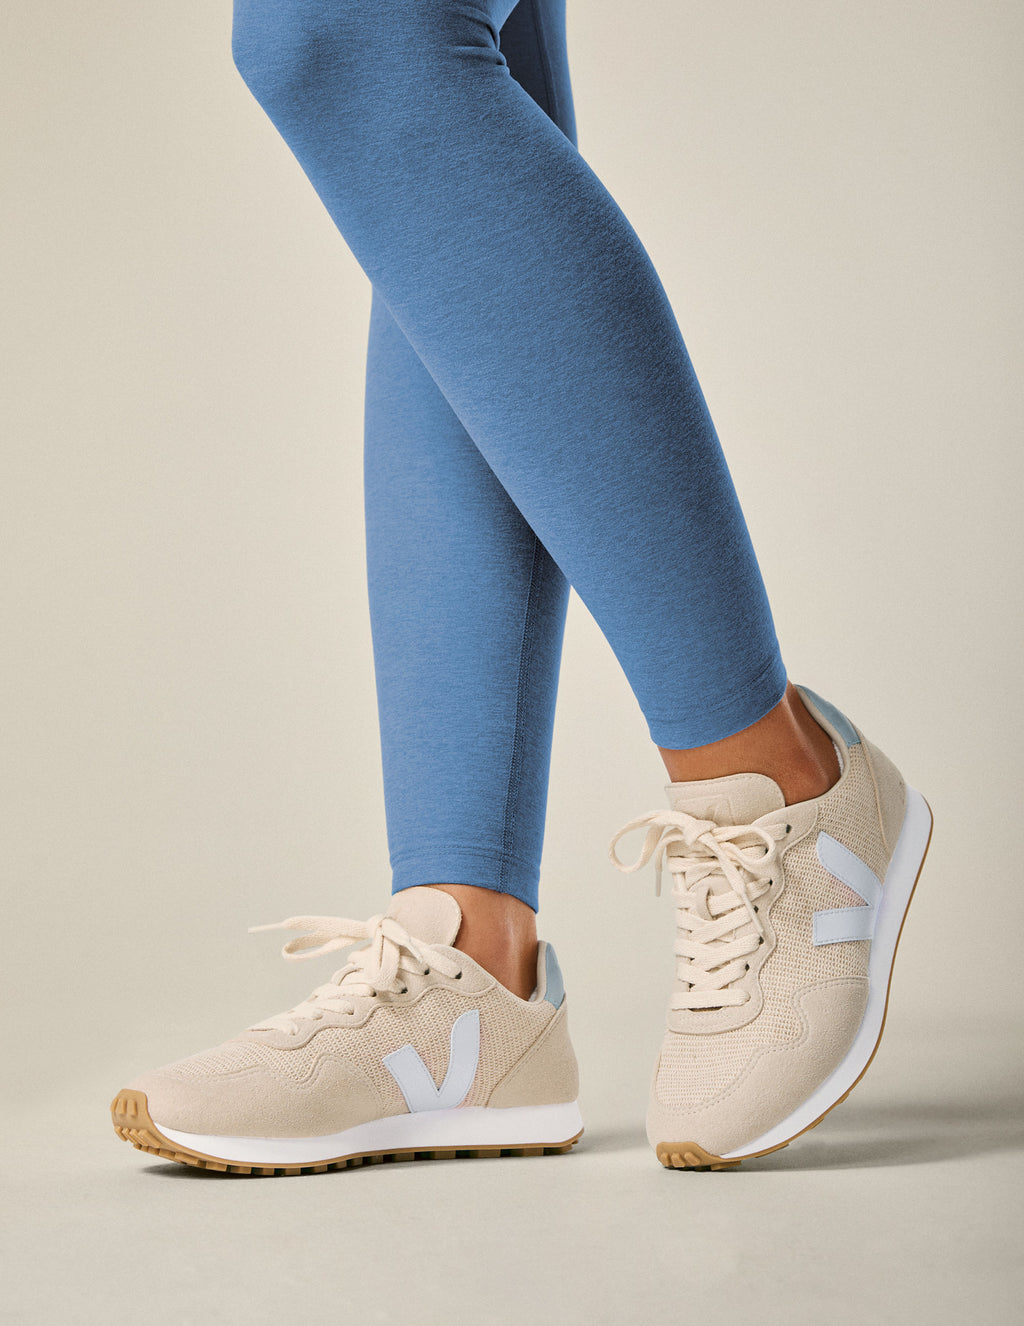 VEJA SDU Sneakers Featured Image